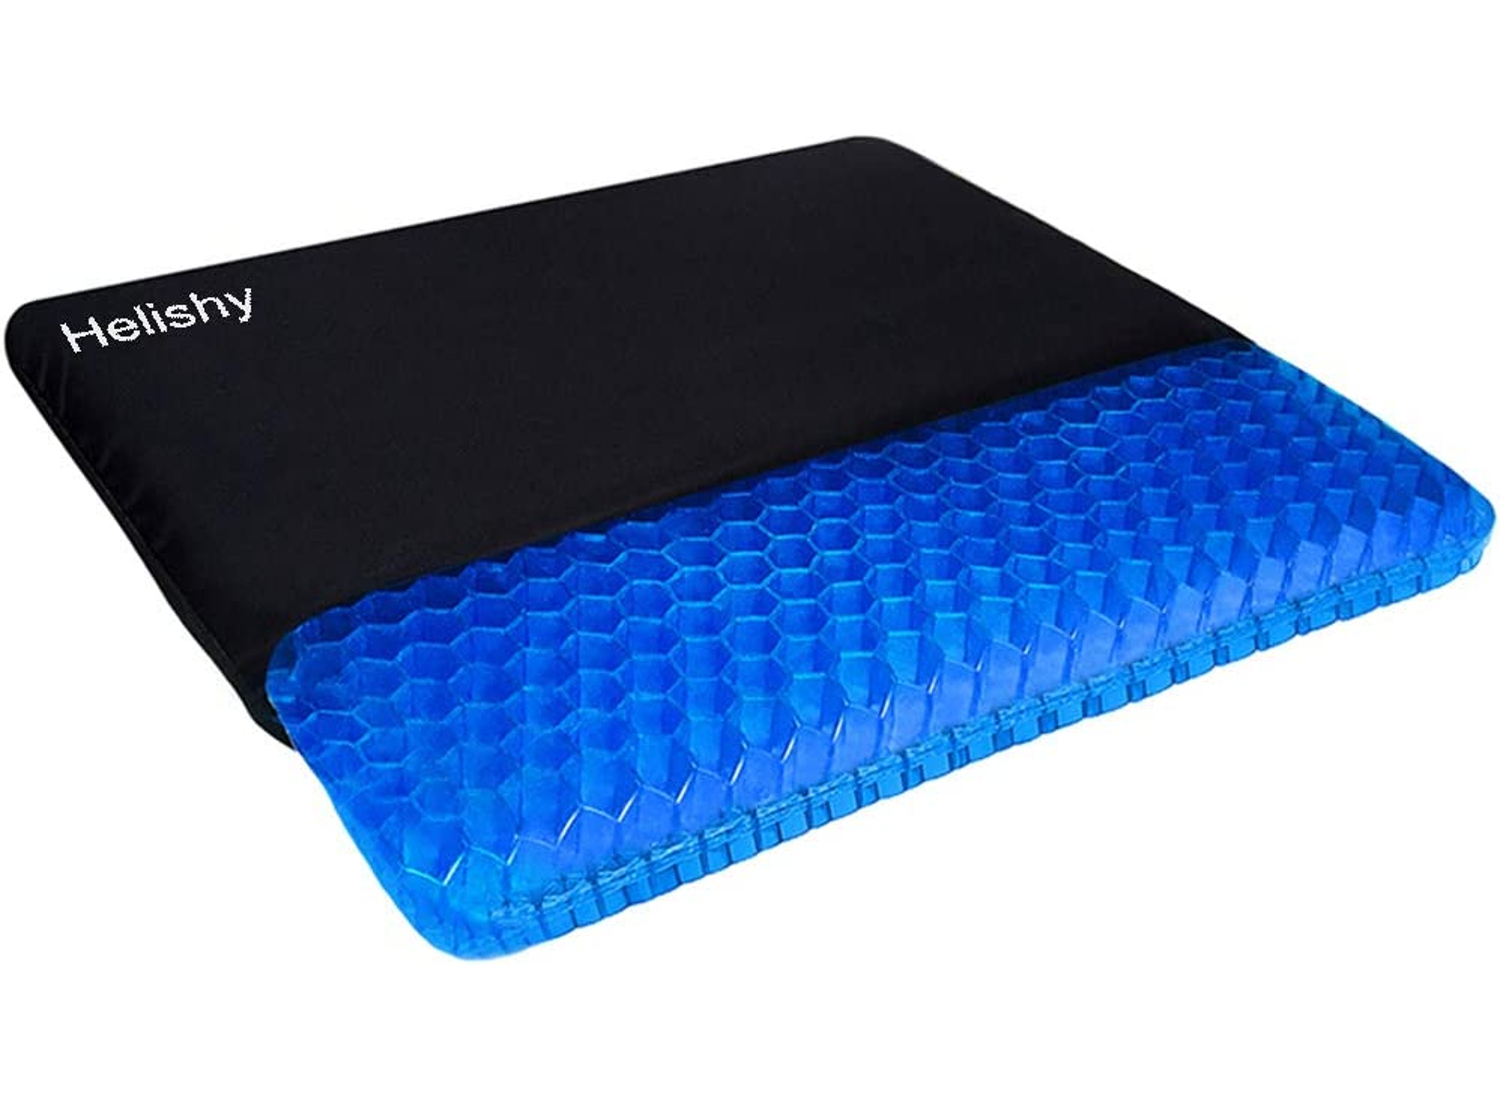 Everlasting comfort seat cushion reviews in Home Office - ChickAdvisor